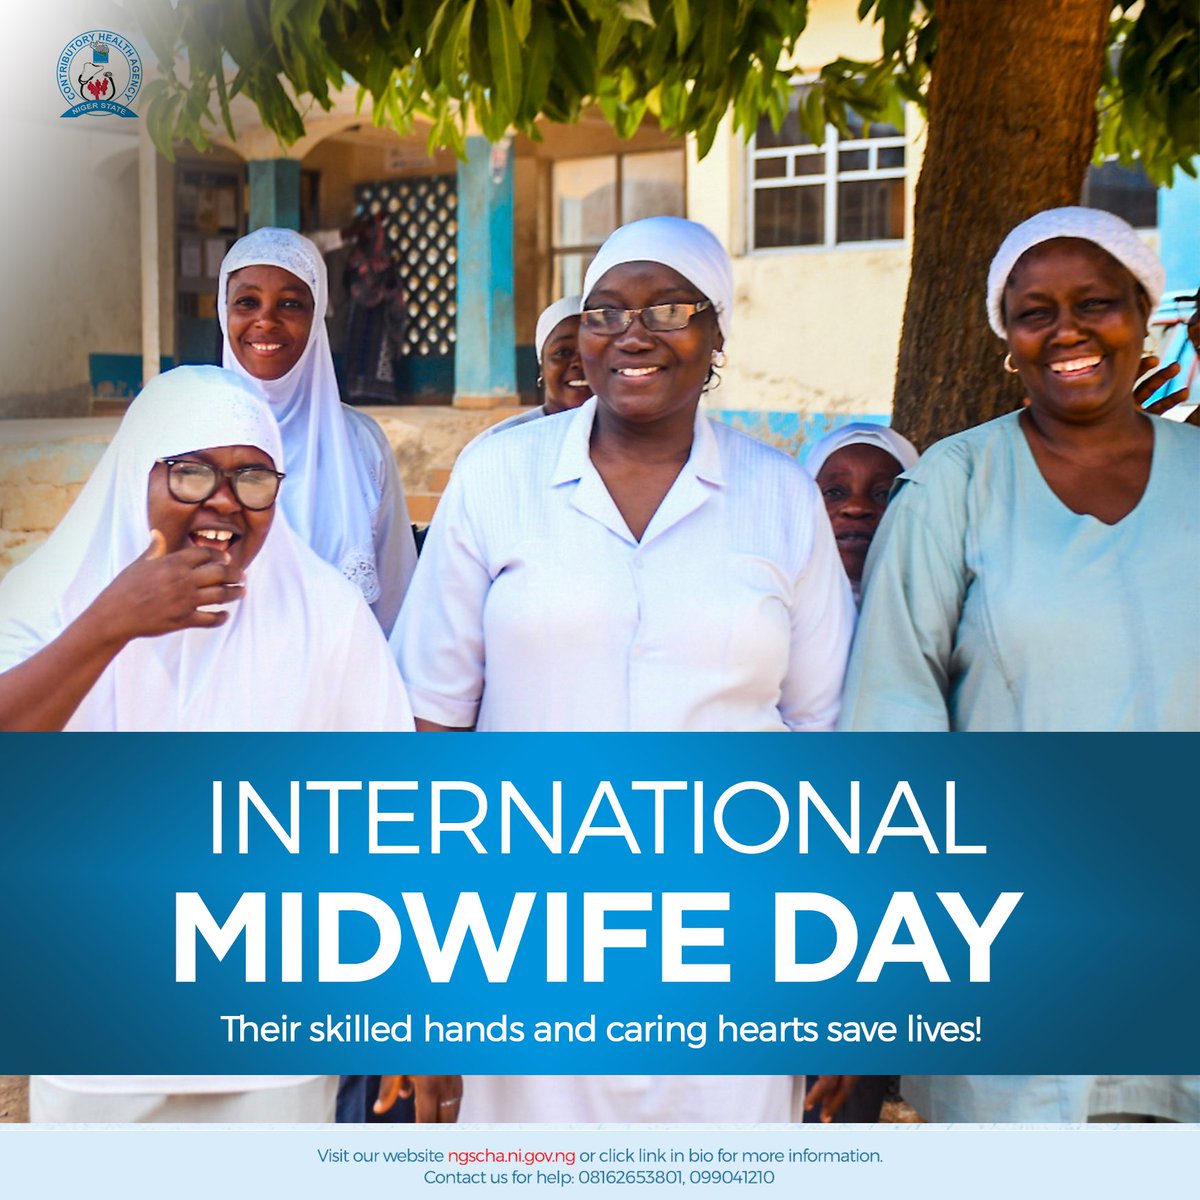 Today on #InternationalDayOfTheMidwife, we honour all our wonderful midwives not only in Niger State but also around the world! Midwives are the unsung heroes of childbirth, ensuring safe childbirth and healthy mothers and babies. Thank you ❤️! #NiCare #NigerState #Midwife